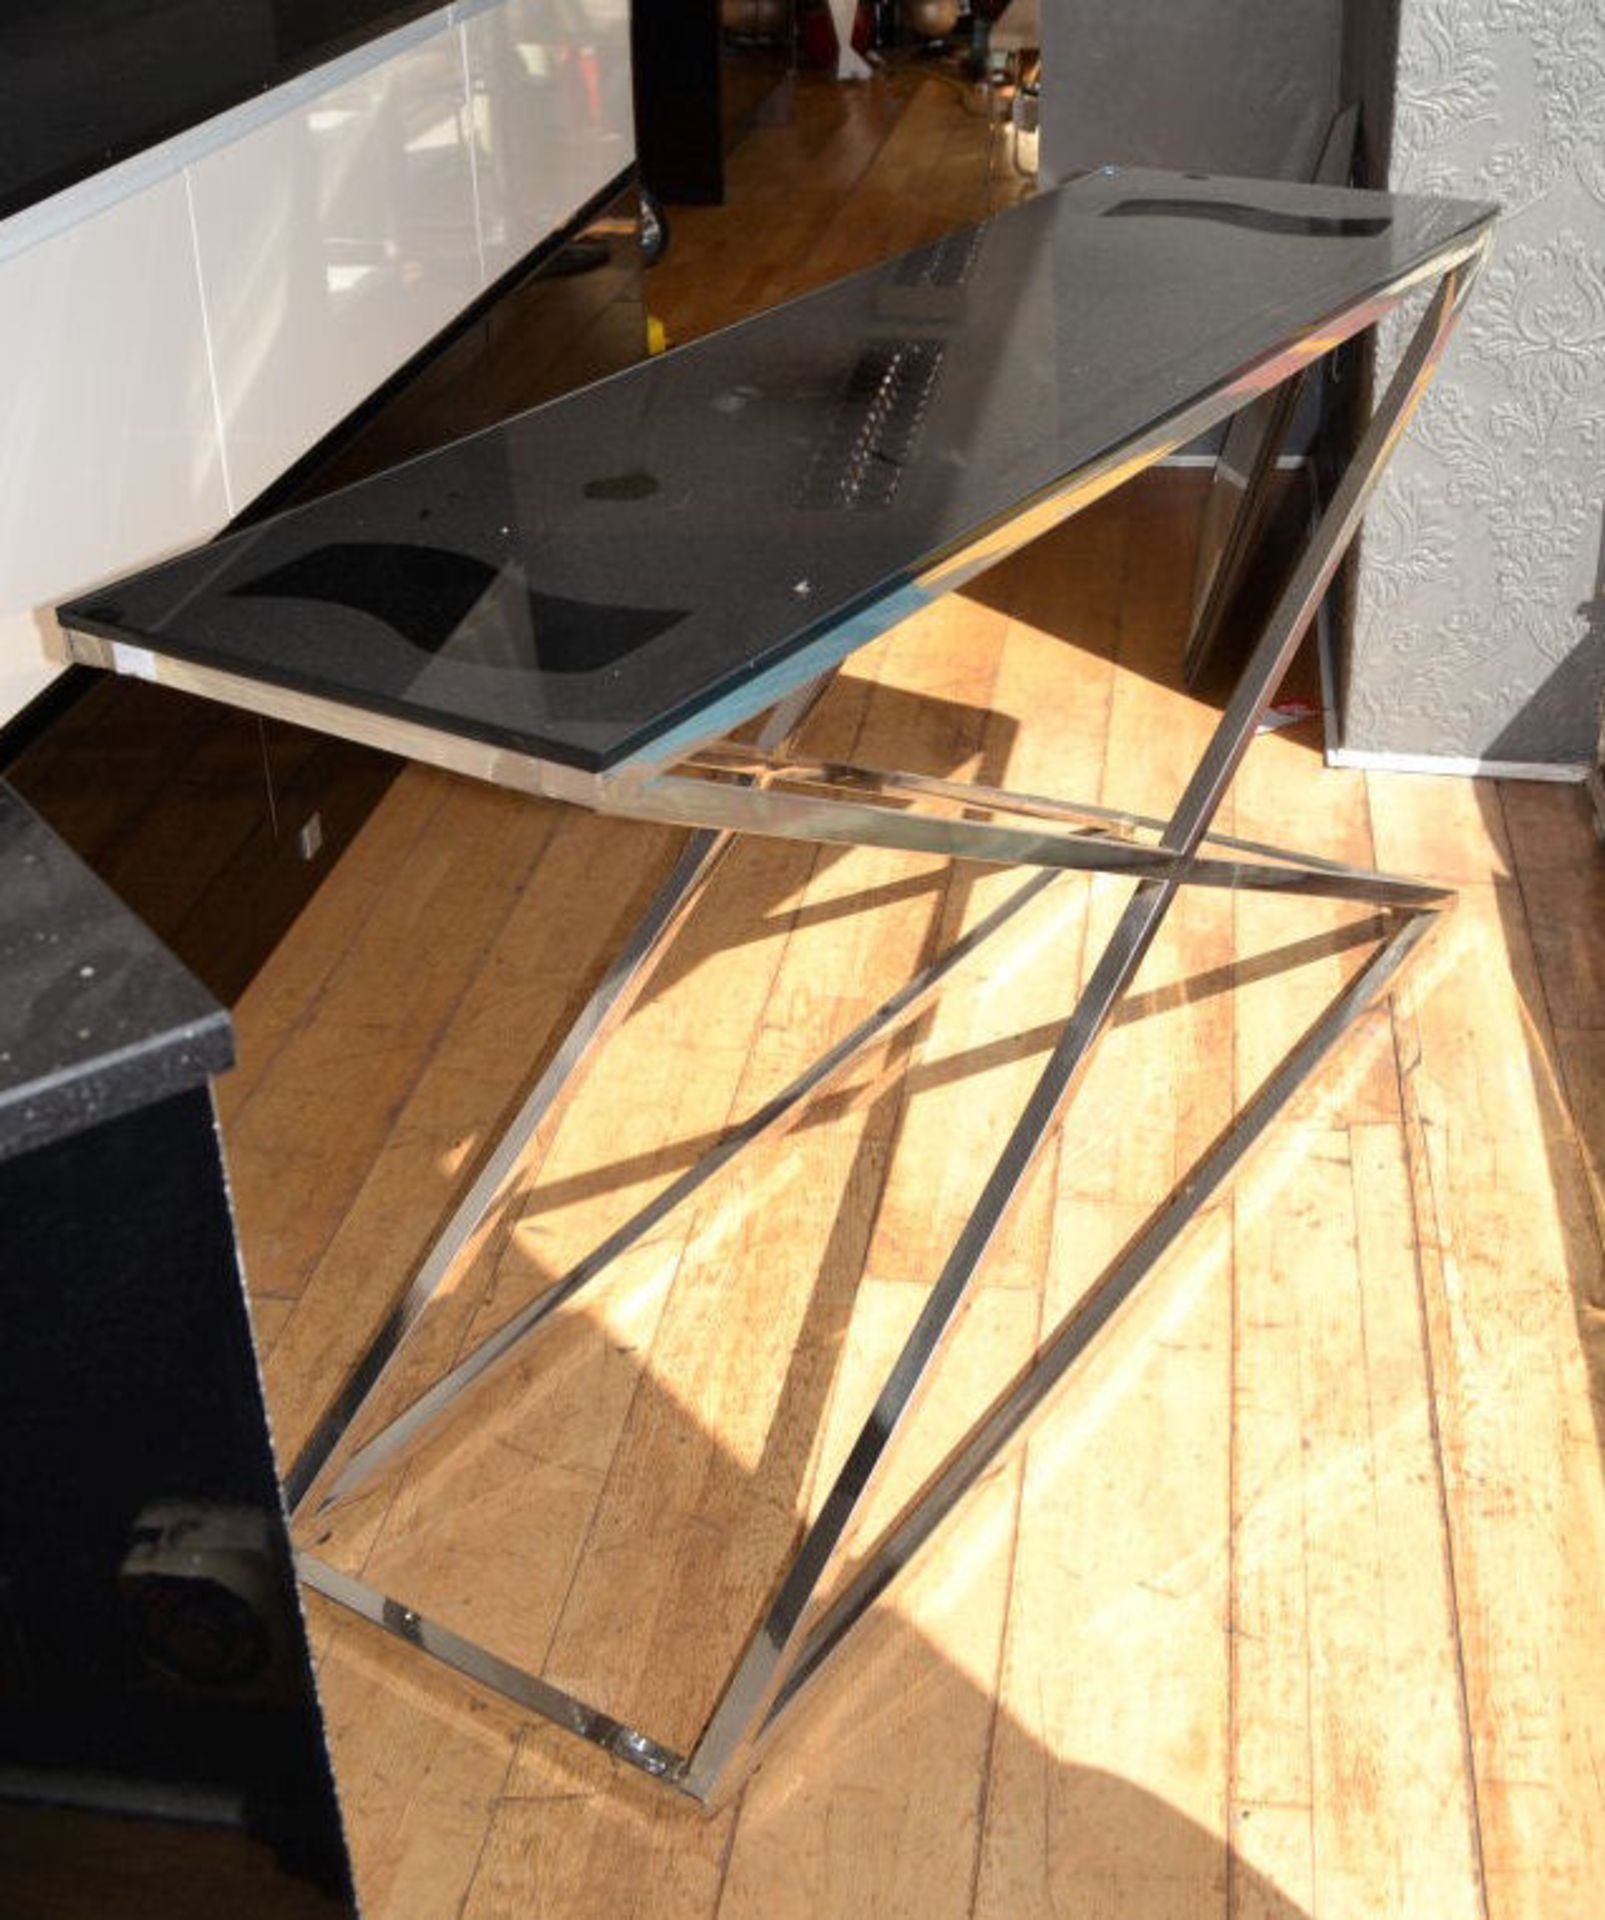 1 x Black Glass Topped Table With Silver Legs. 130X40.5cm. 74.5cm Tall. - CL108 - Image 3 of 3